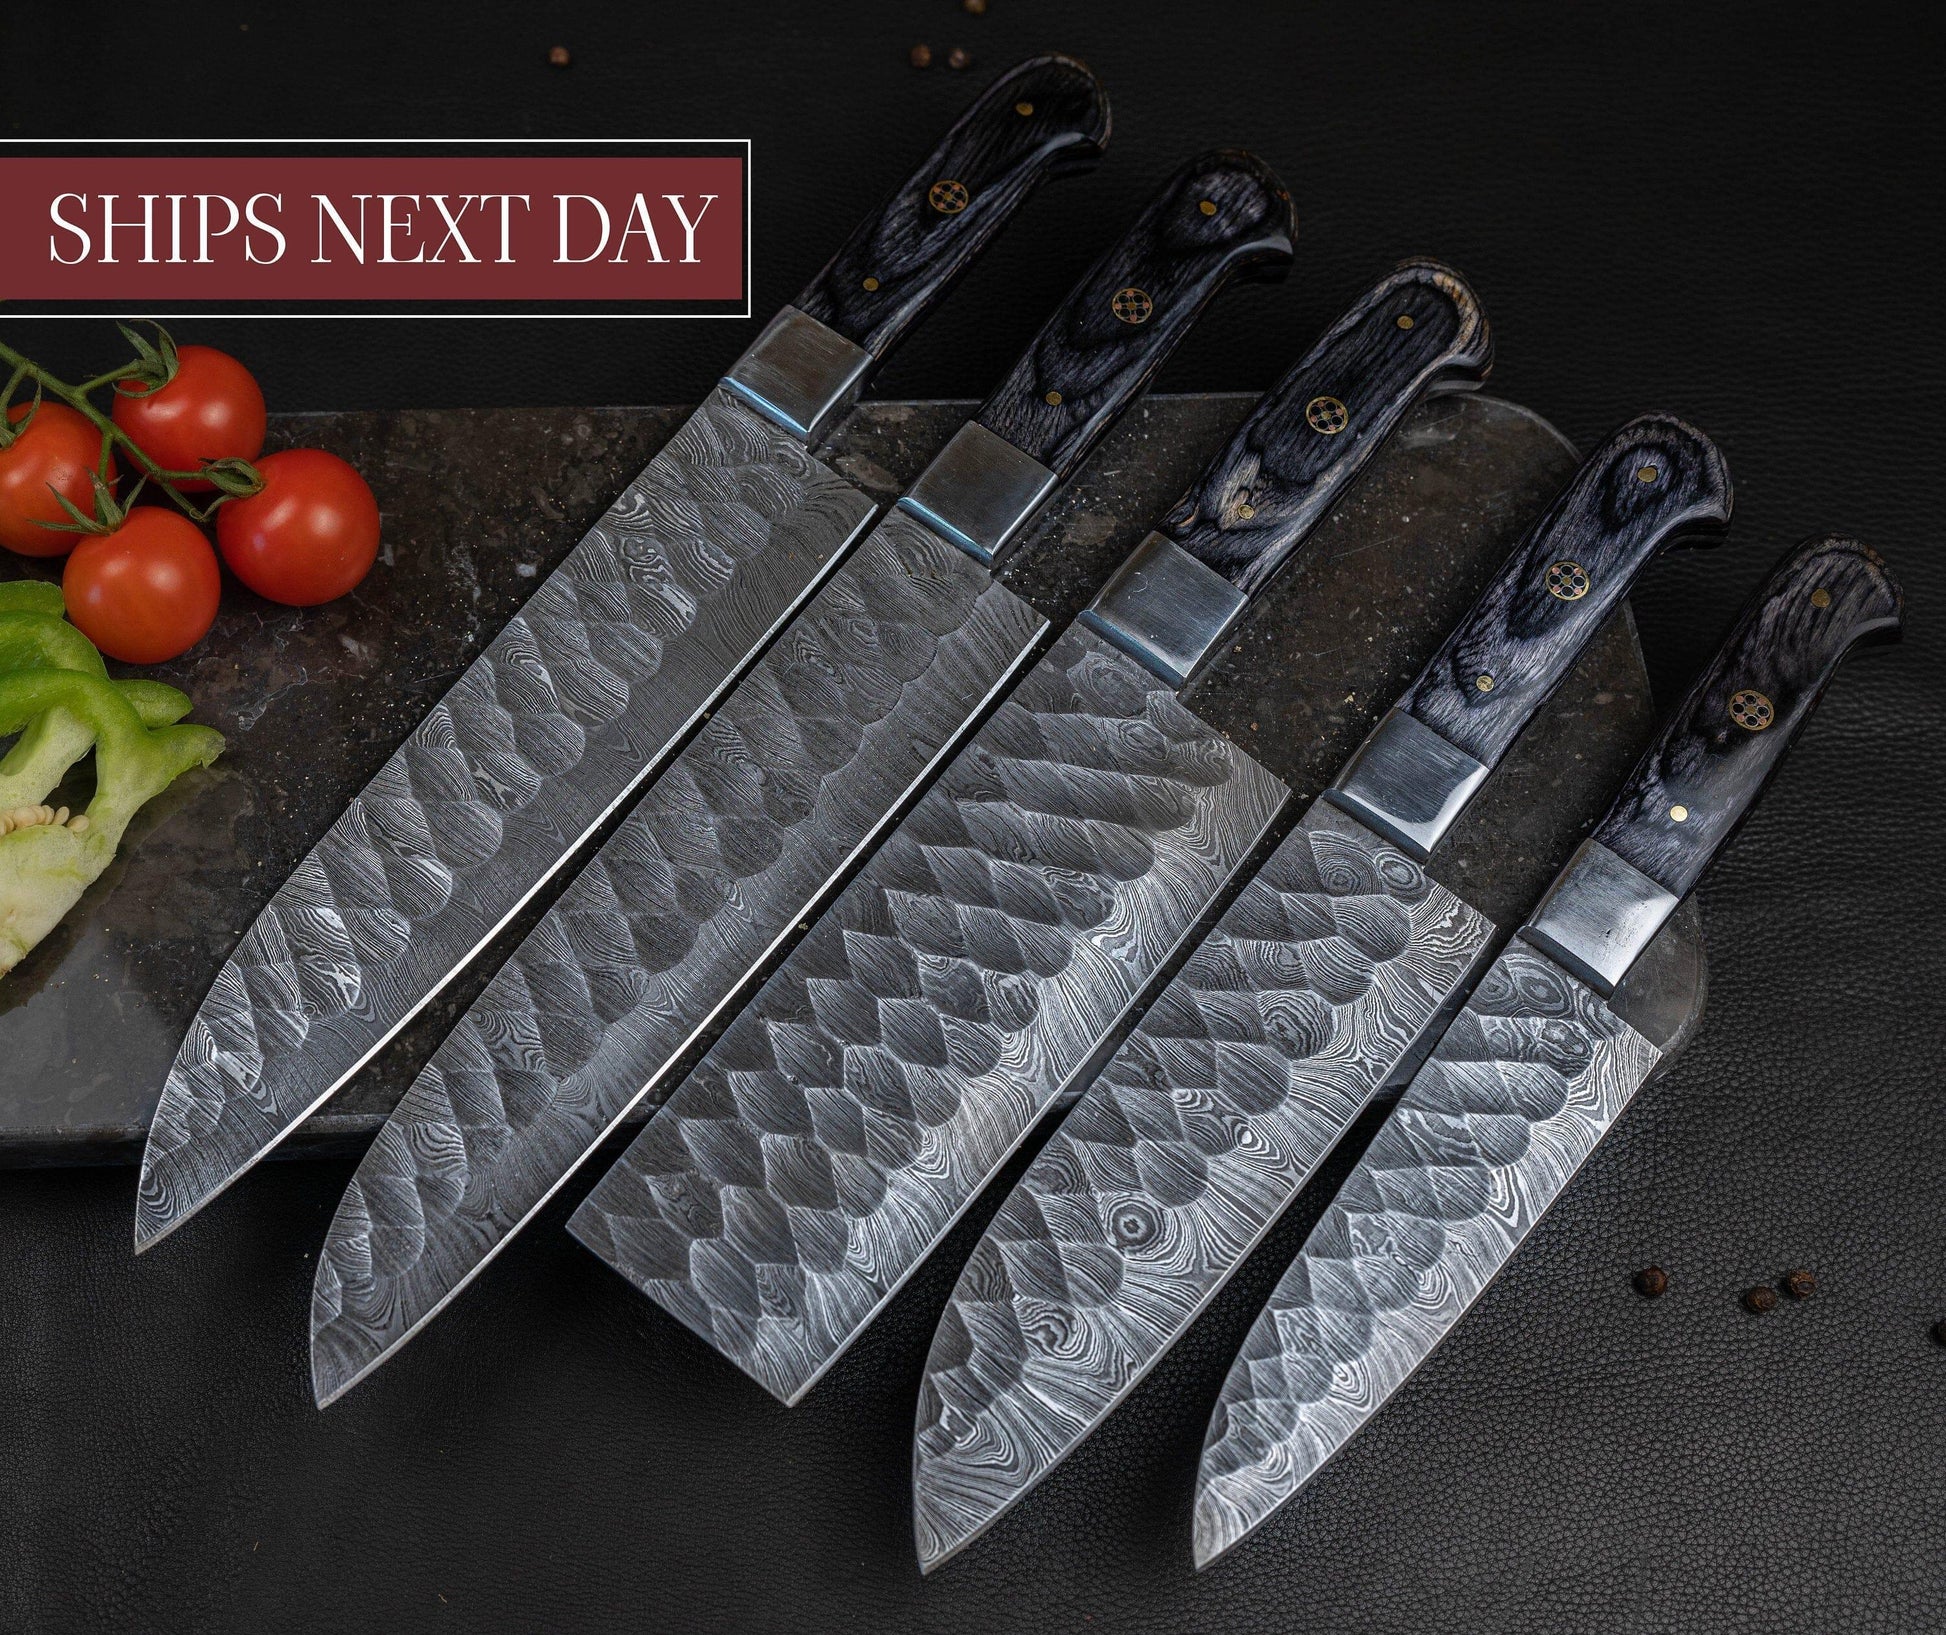 Damascus Chef Knife 5 Pc Set - Best Gift - Damascus Kitchen Knives Set with High Quality Steel Perfect Gift for loved ones Free Leather Roll Etsy 